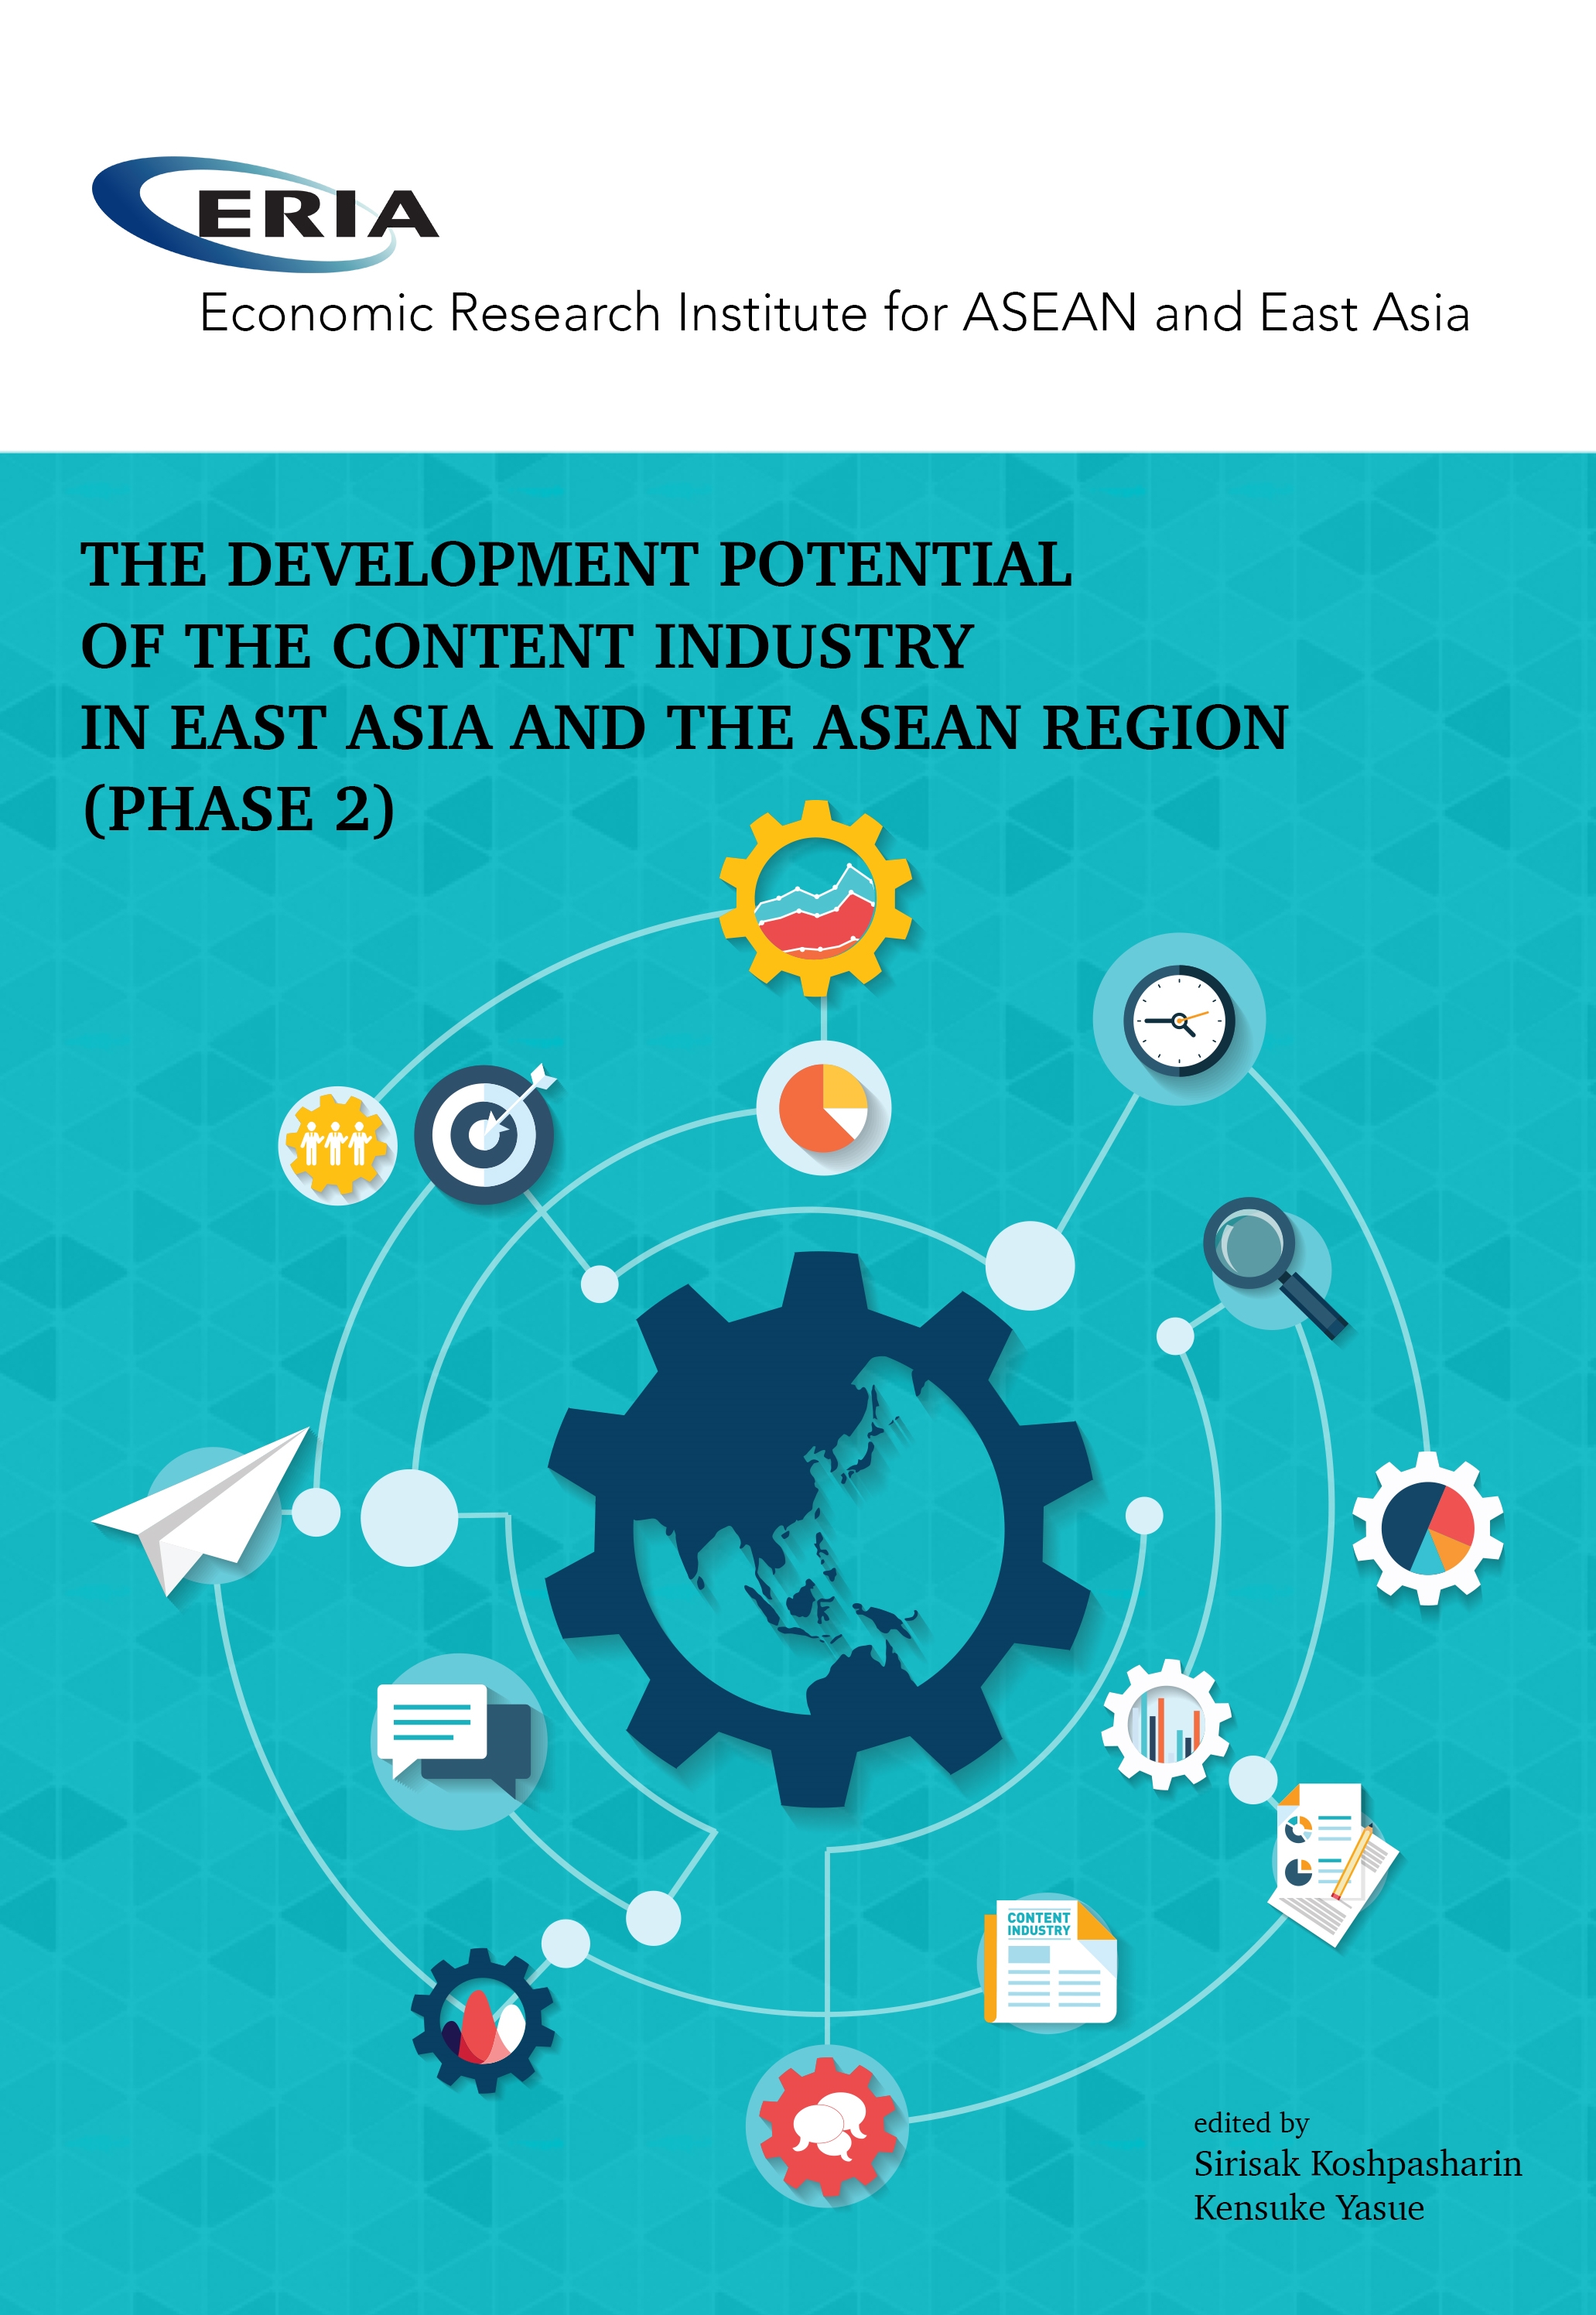 The Development Potential of the Content Industry in East Asia and the ASEAN Region (Phase 2)